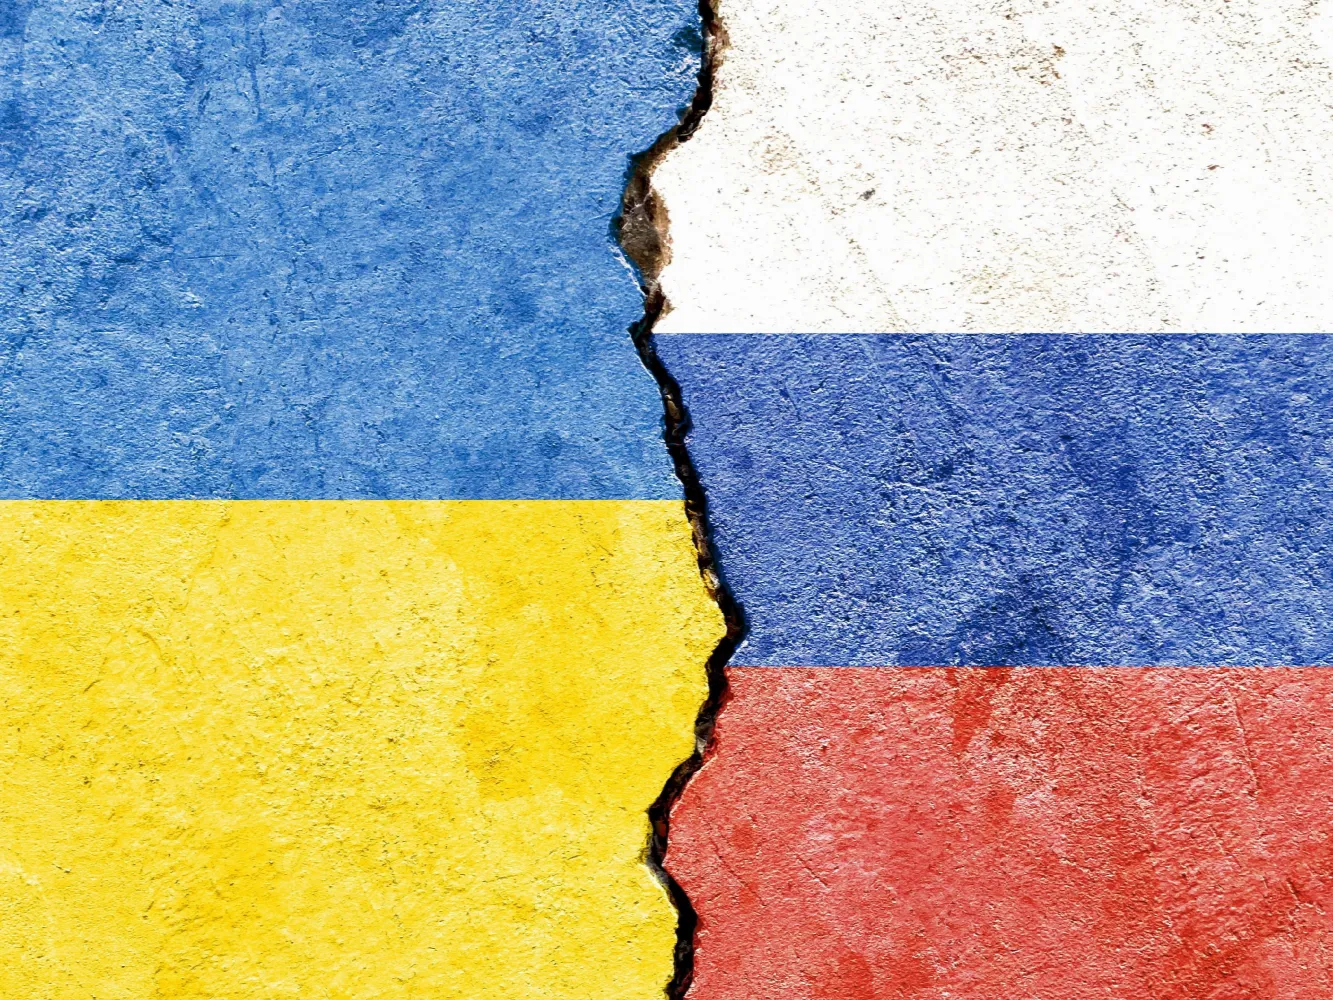 illustration-flags-ukraine-russia-separated-by-crack-conflict-comparison